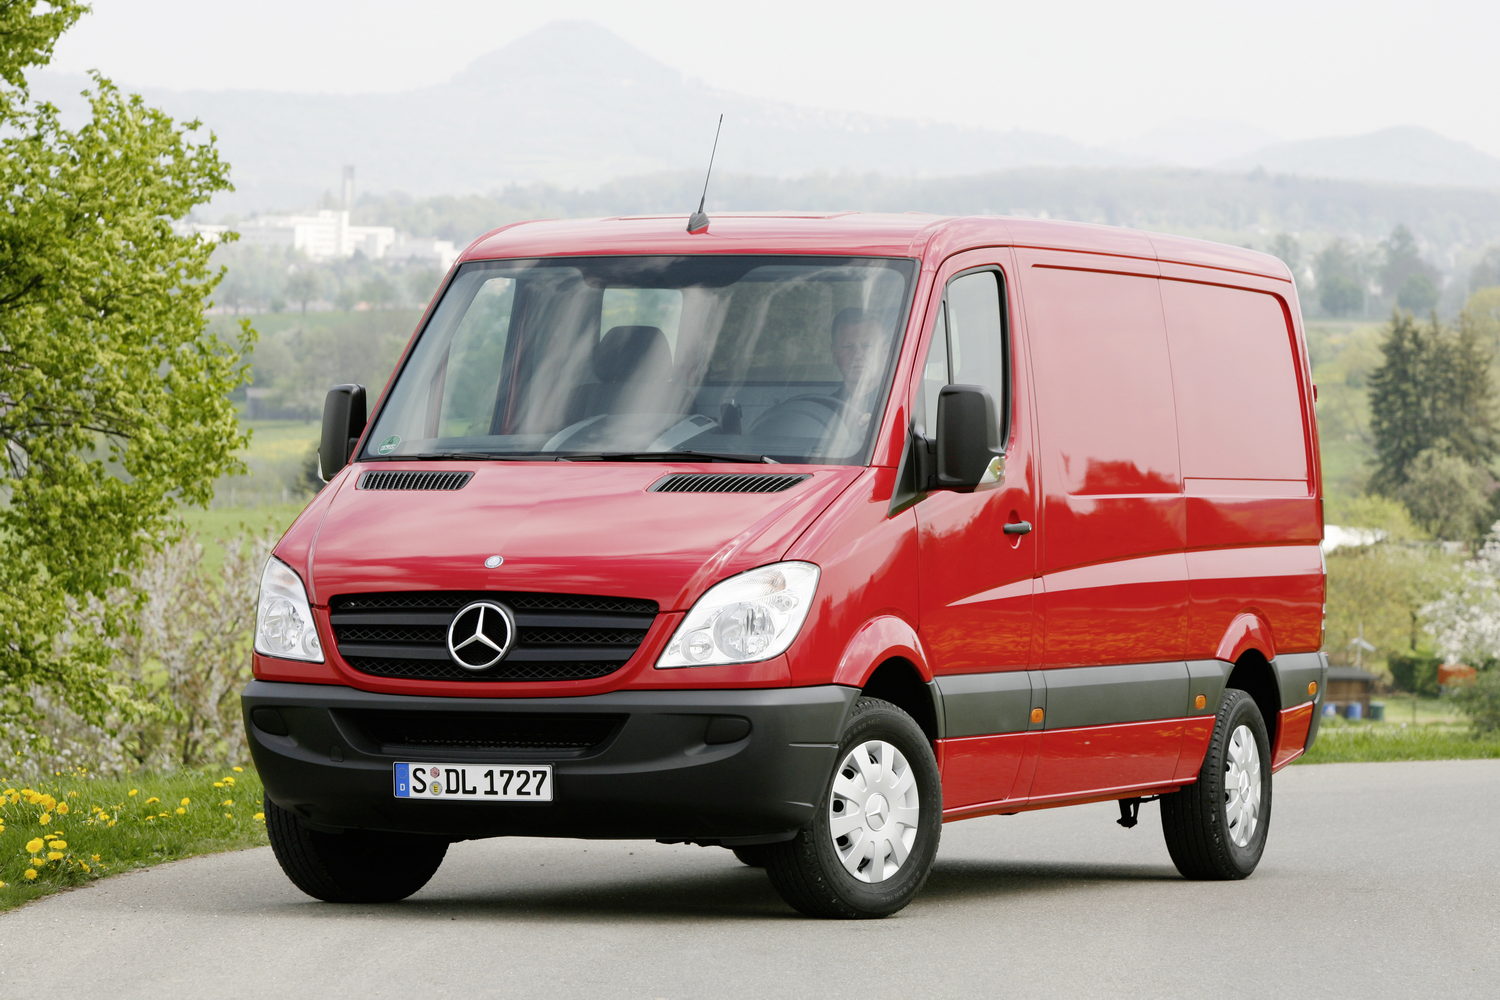 Private motor tax on a 2.1-litre Sprinter?